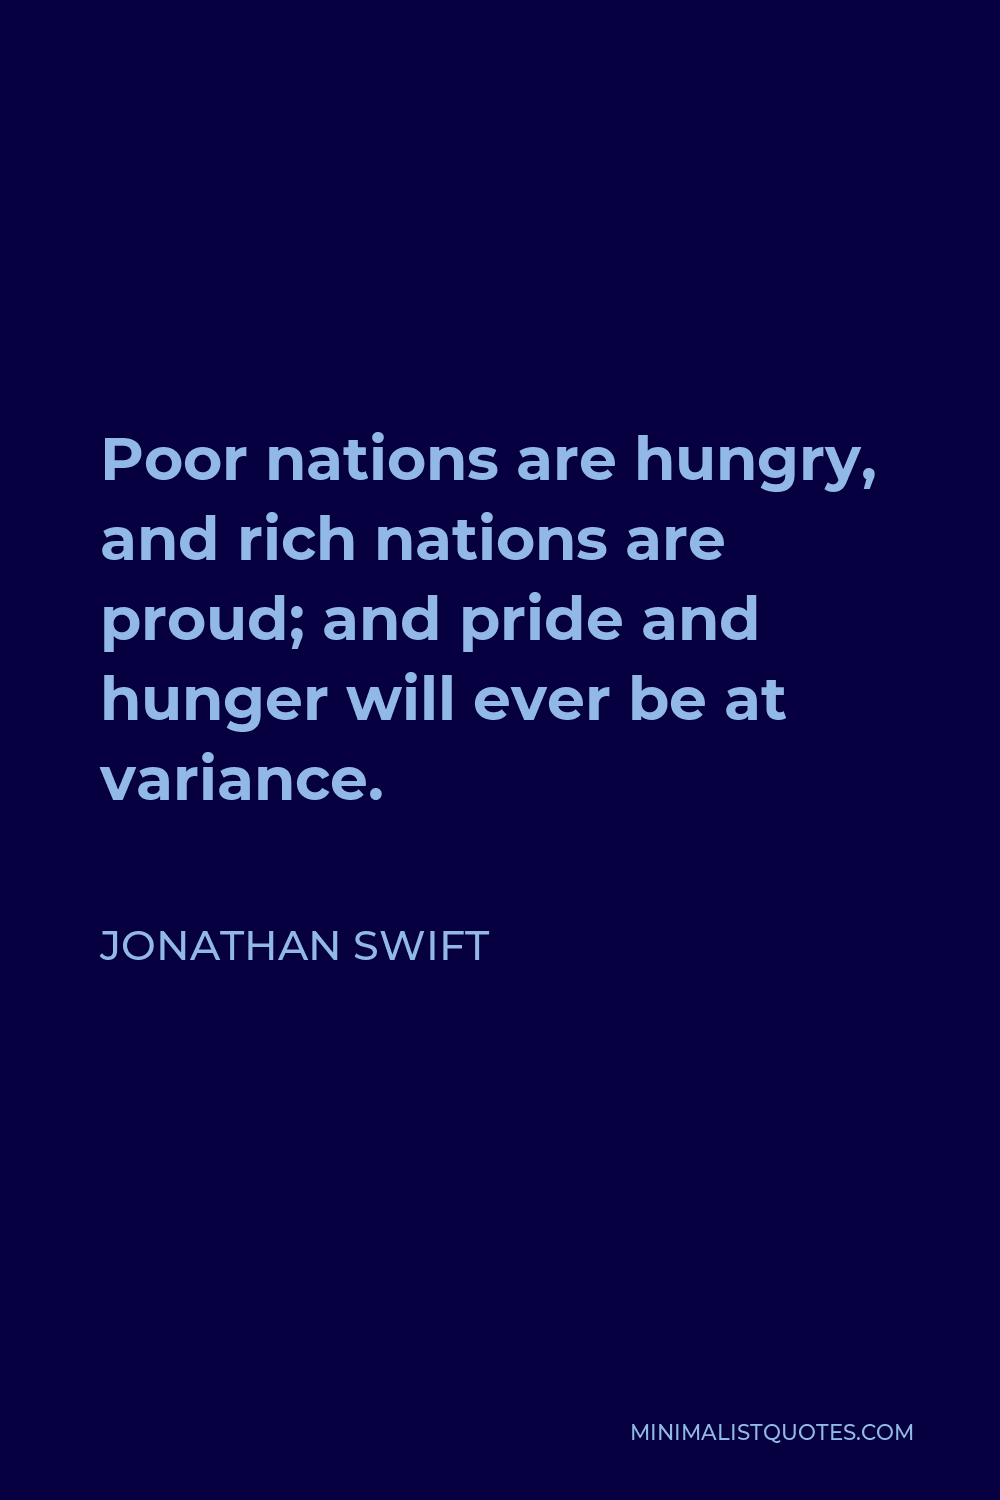 Jonathan Swift Quote - Poor nations are hungry, and rich nations are proud; and pride and hunger will ever be at variance.